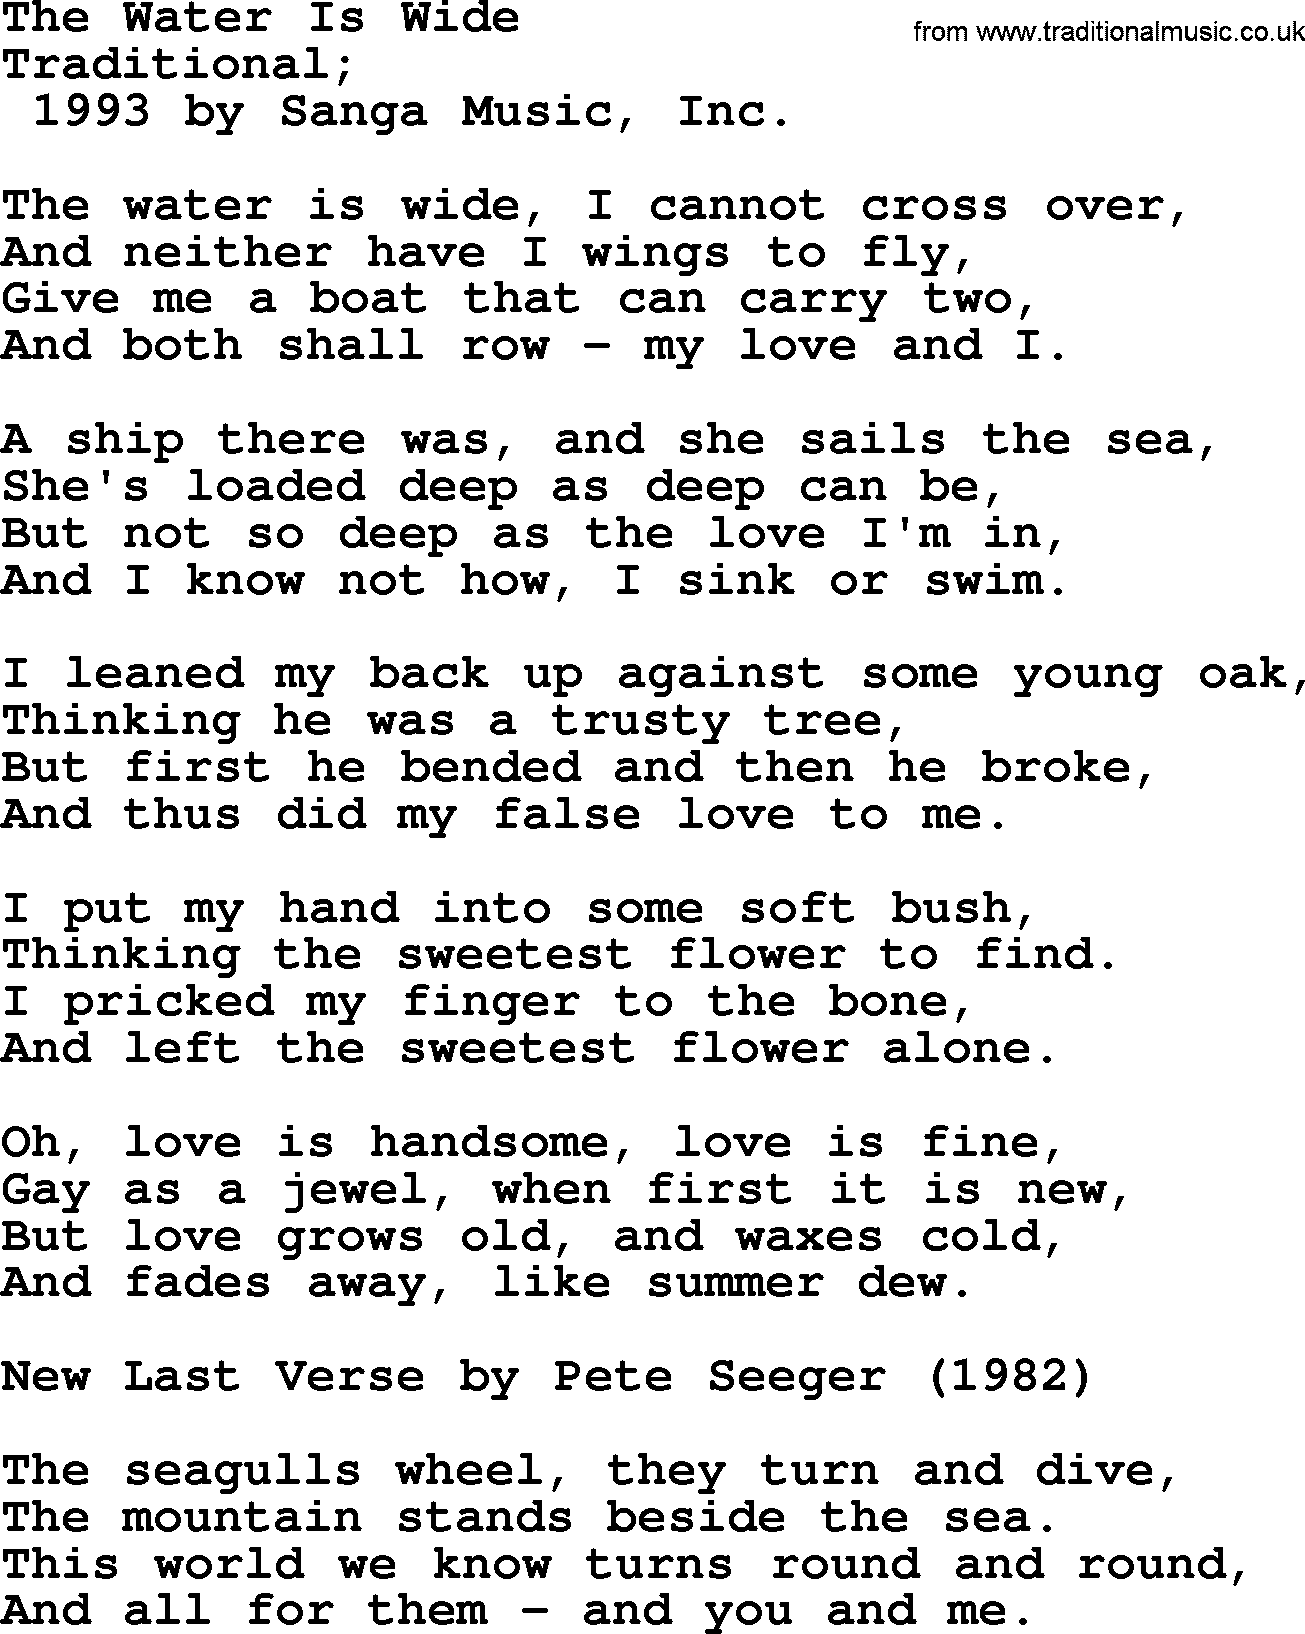 Pete Seeger song The Water Is Wide-Pete-Seeger.txt lyrics